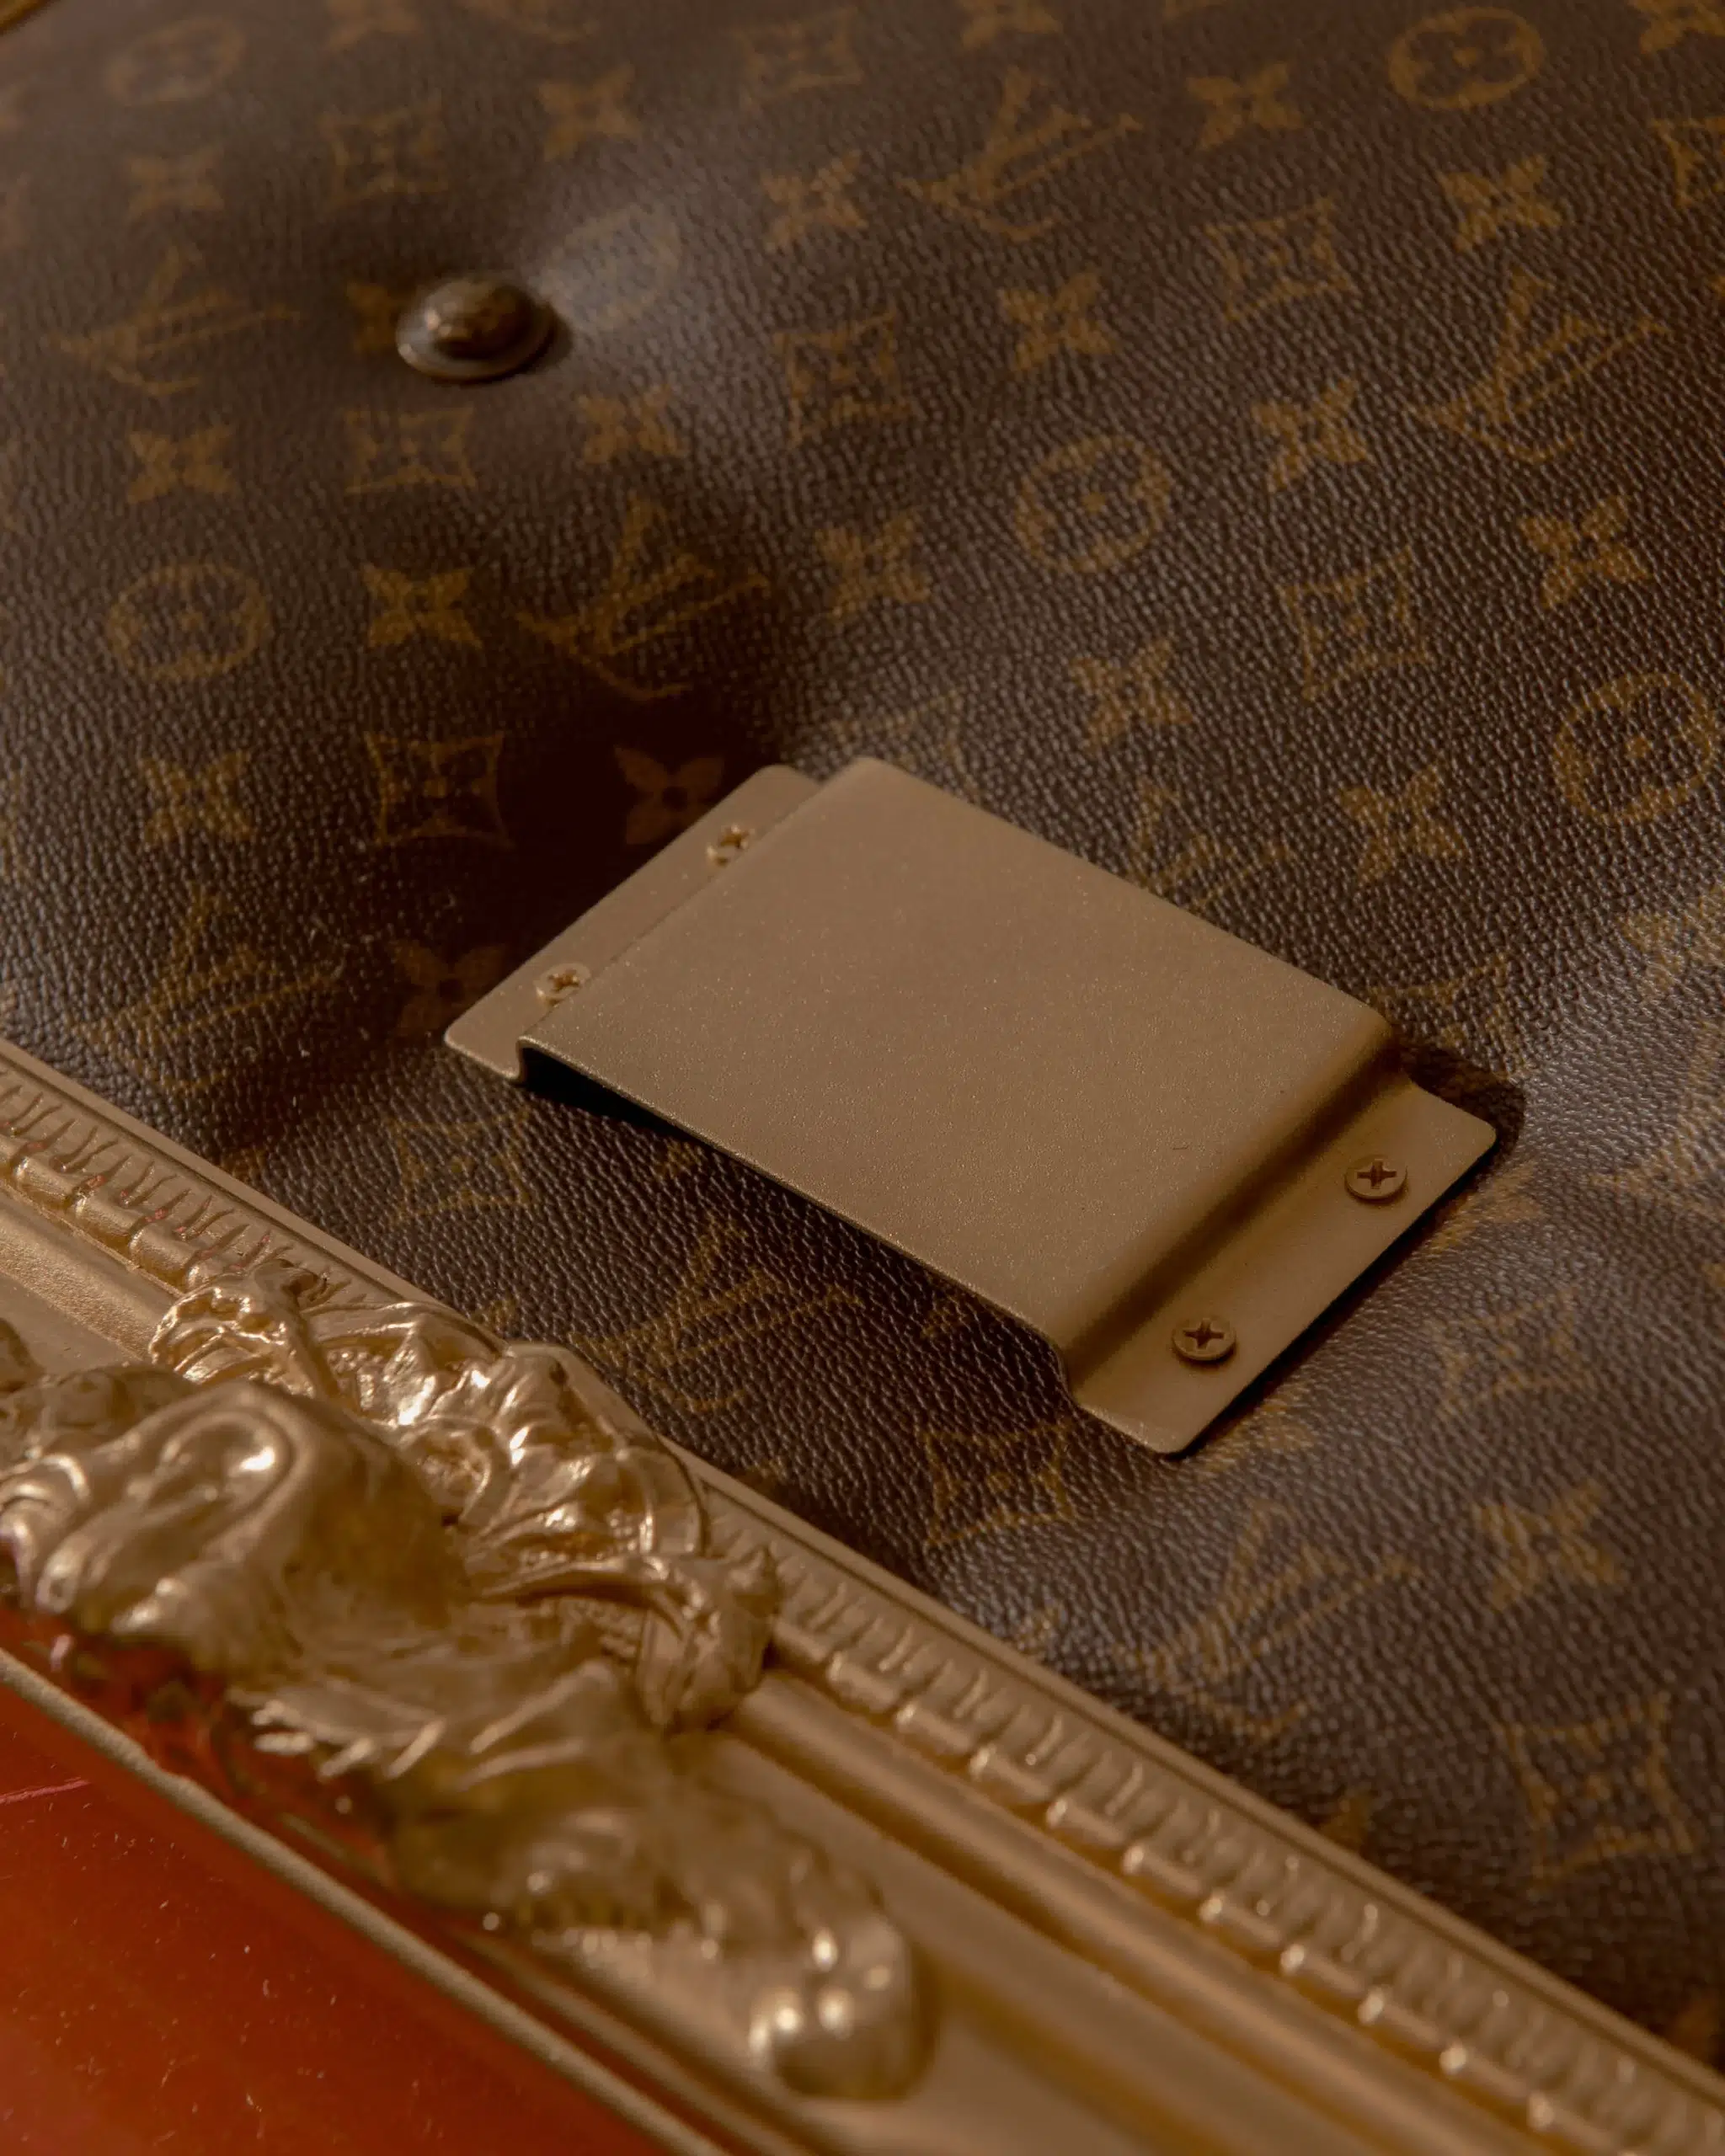 A Hoop suitcase with a Louis Vuitton handle.